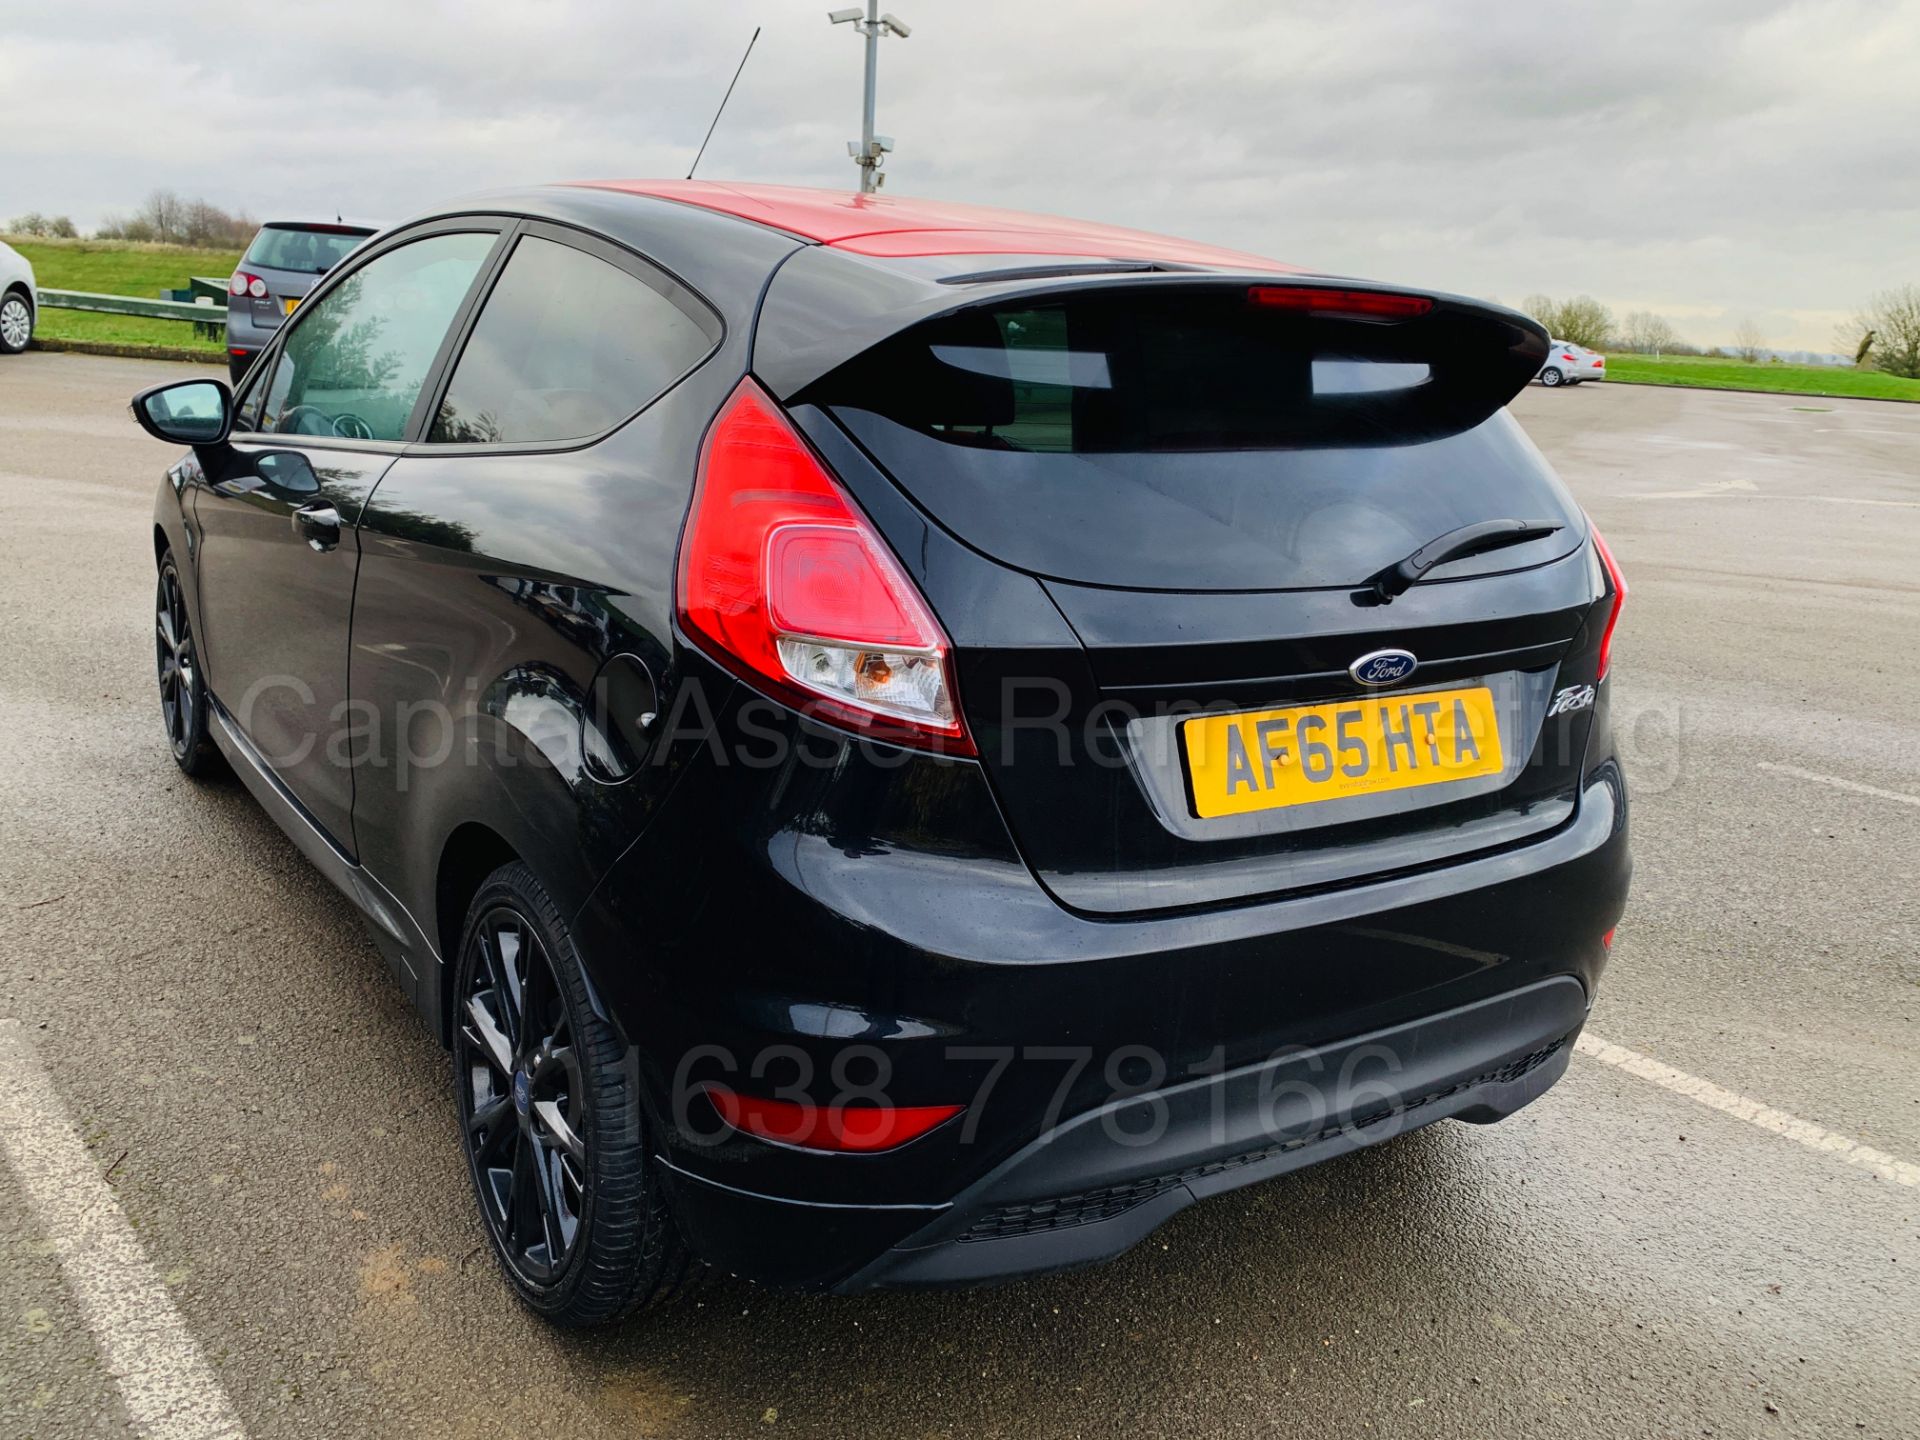 (On Sale) FORD FIESTA *ZETEC S - BLACK EDITION* (2016 MODEL) '1.0L ECO-BOOST - 140 BHP' - Image 8 of 45